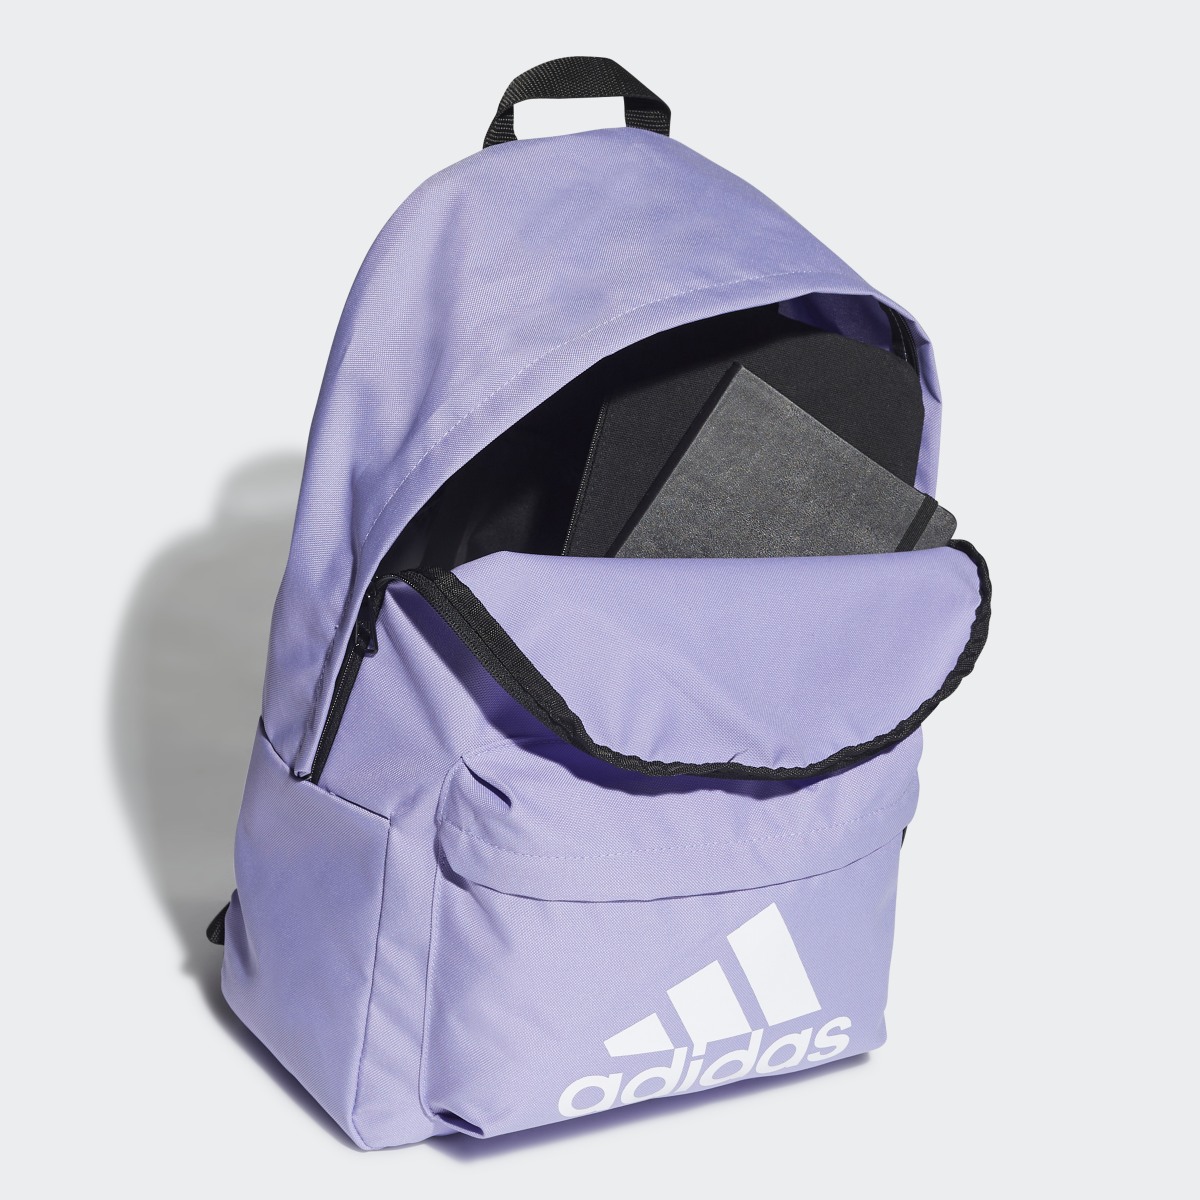 Adidas Classic Badge of Sport Backpack. 5